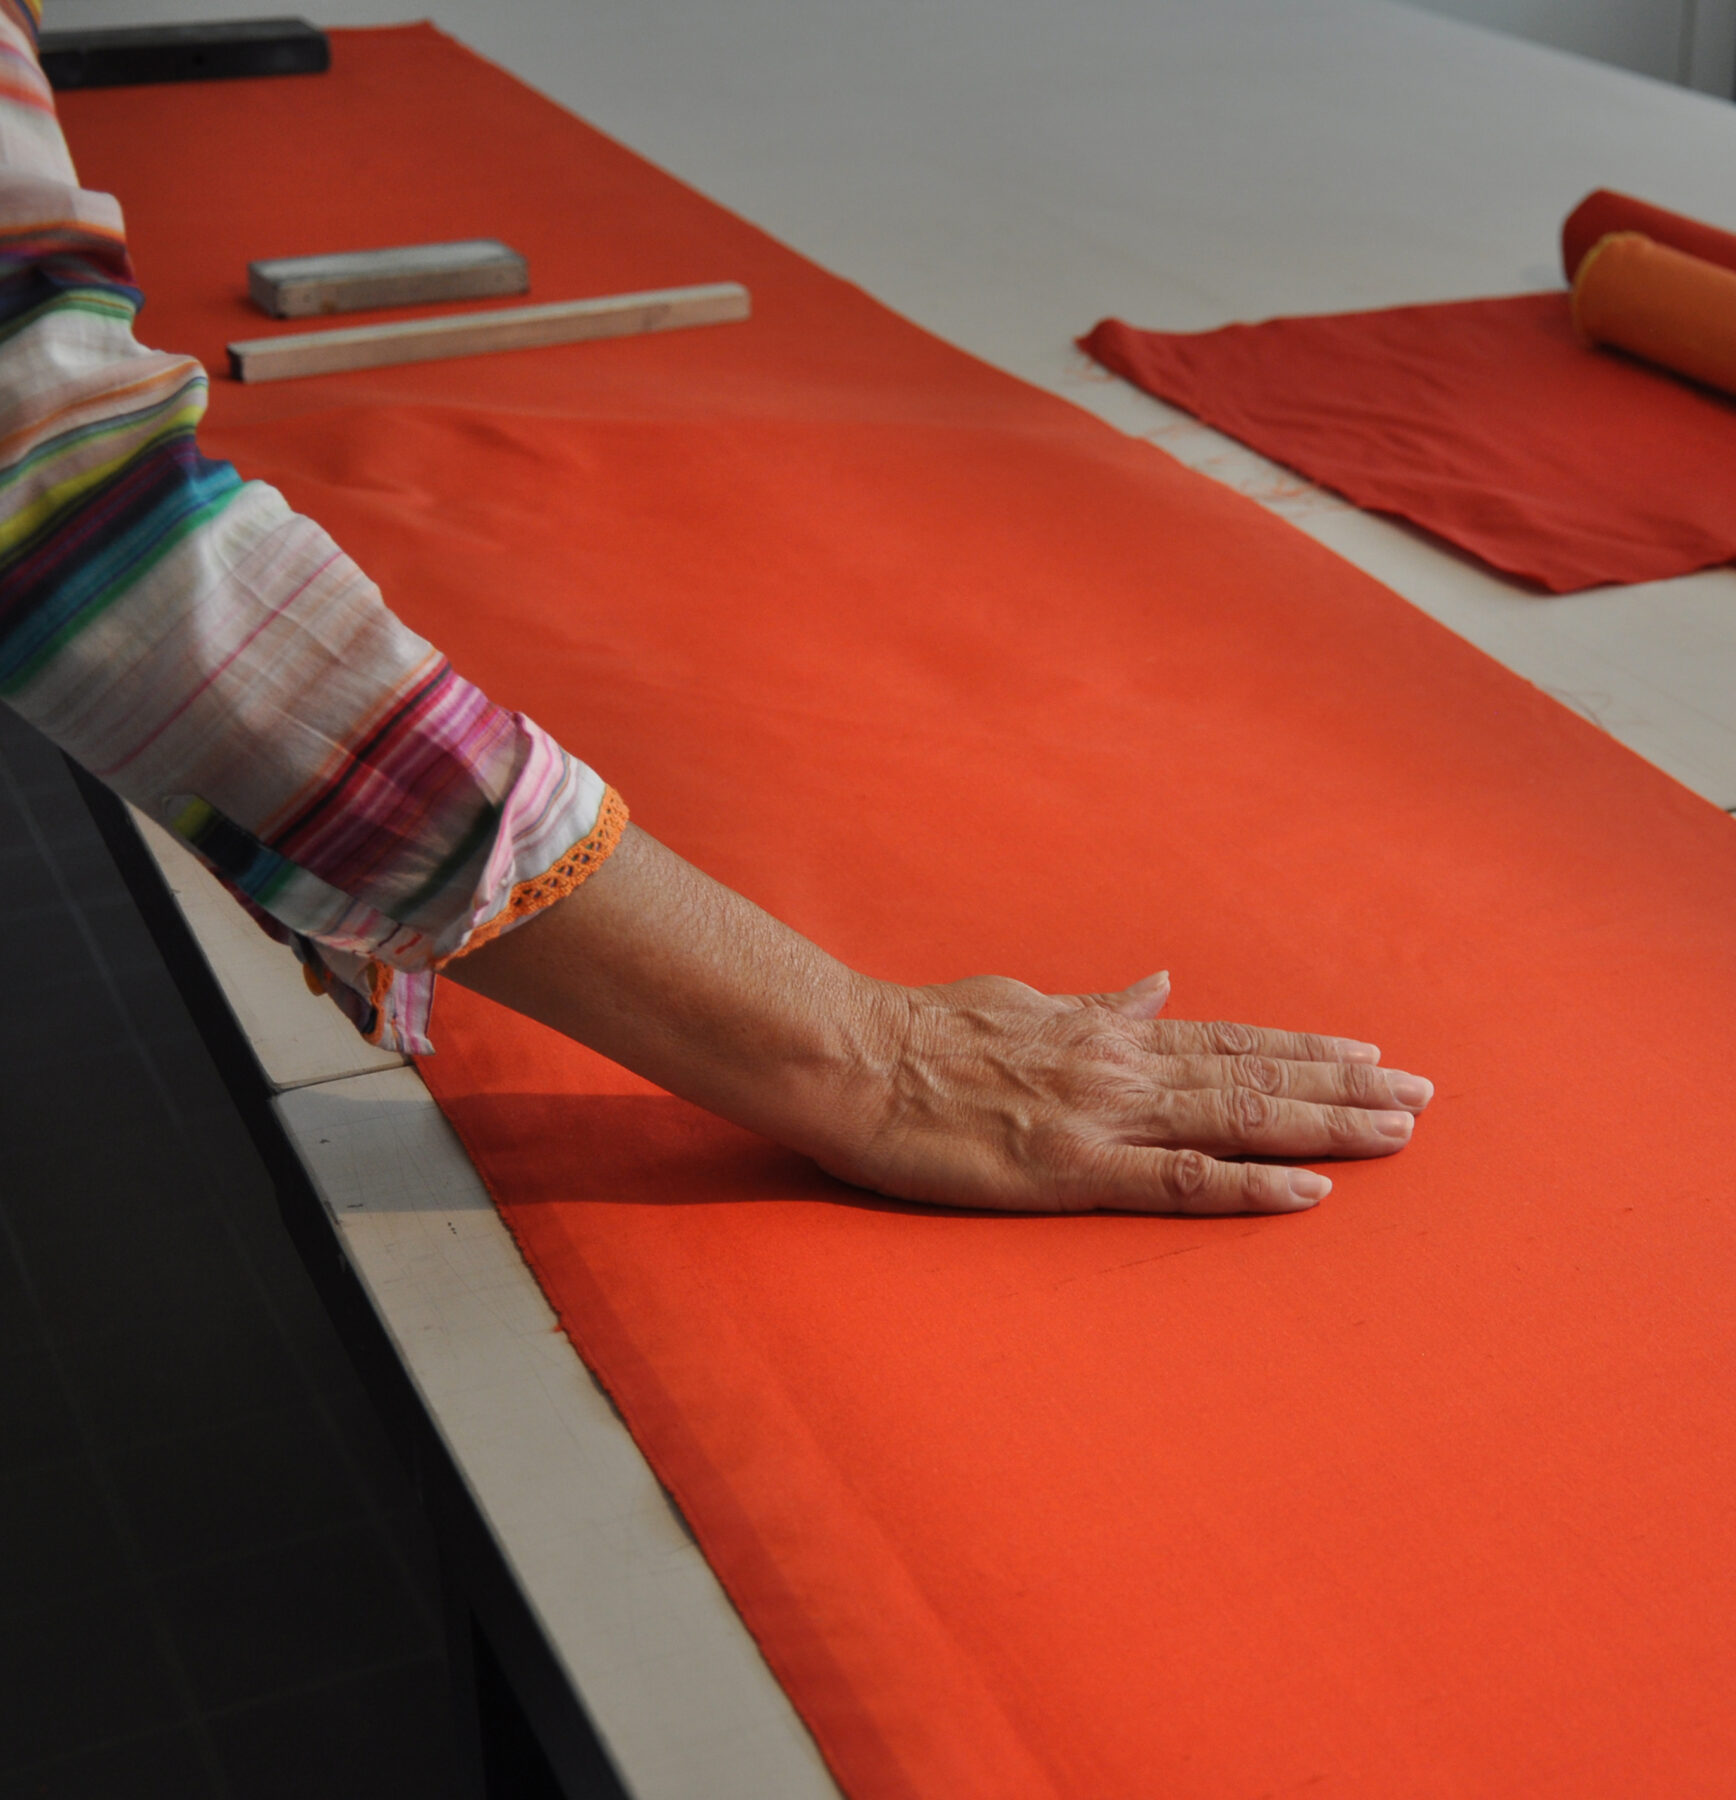 A red dupioni silk is laminated onto the carrier material by hand.